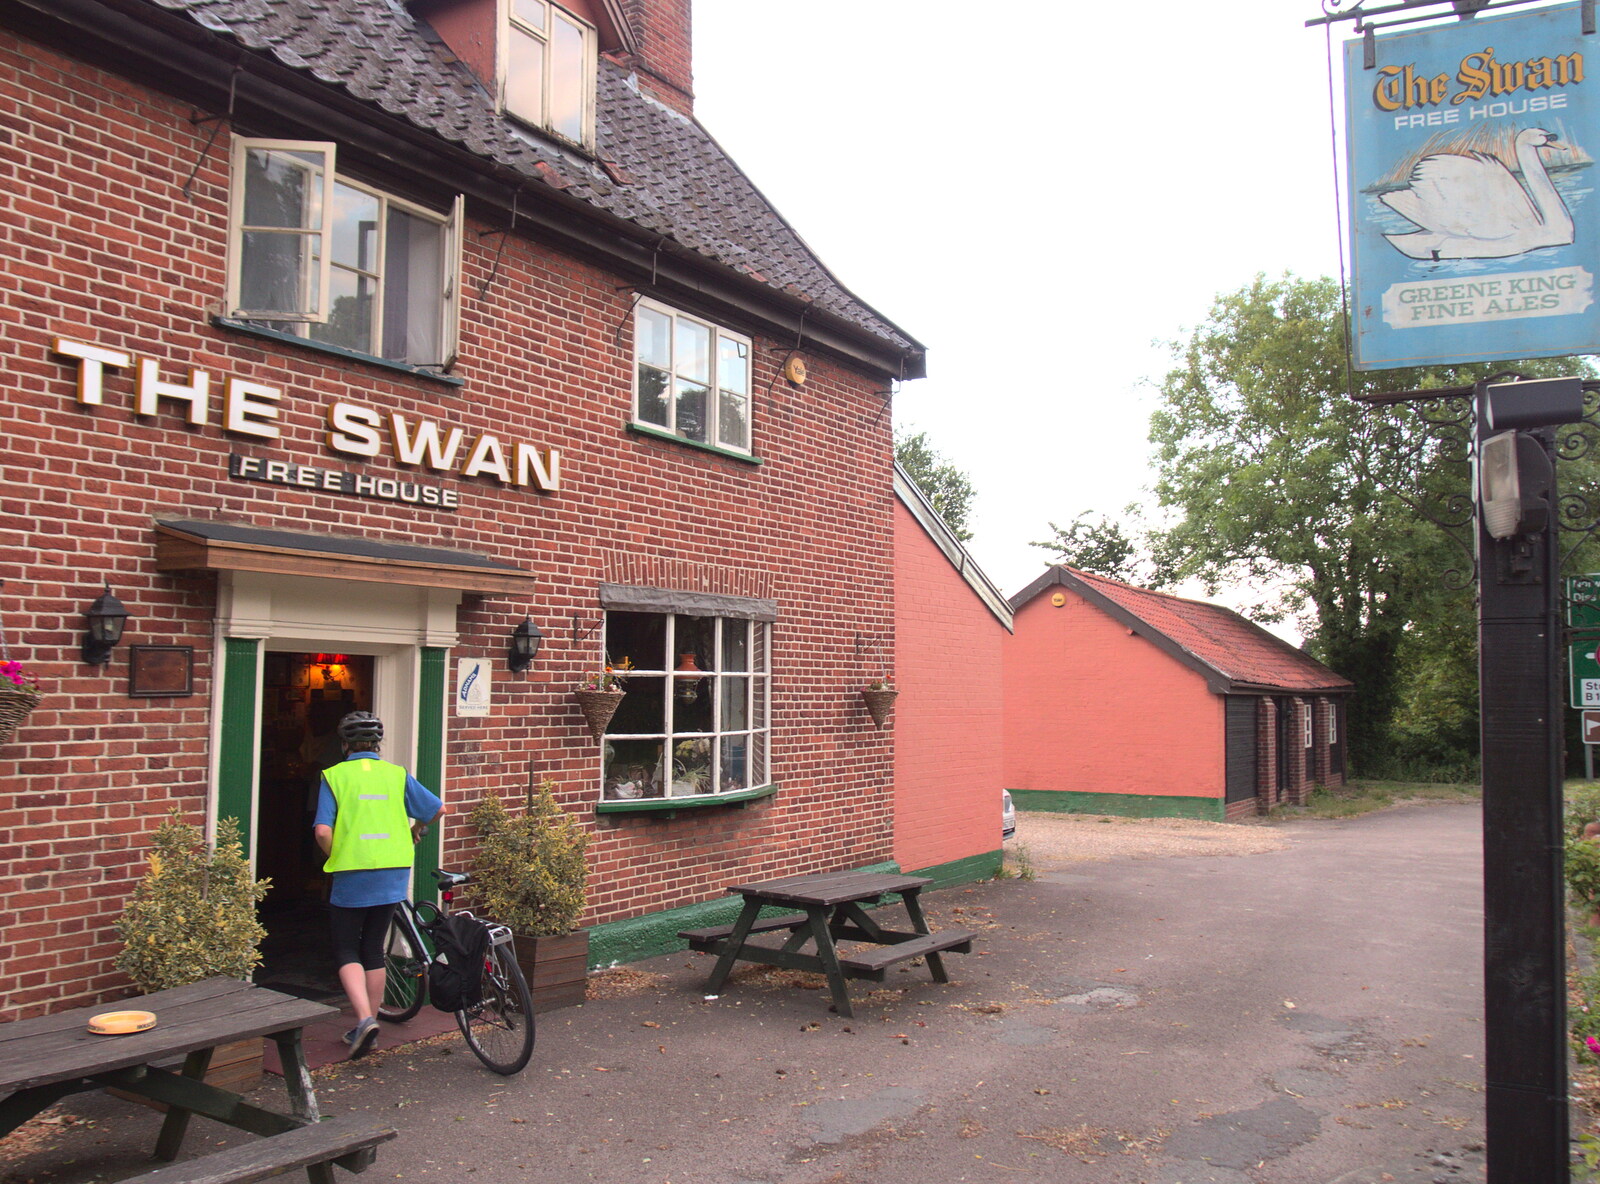 We sneak into the Swan with our bikes from The Real Last Night of the Swan Inn, Brome, Suffolk - 24th June 2017